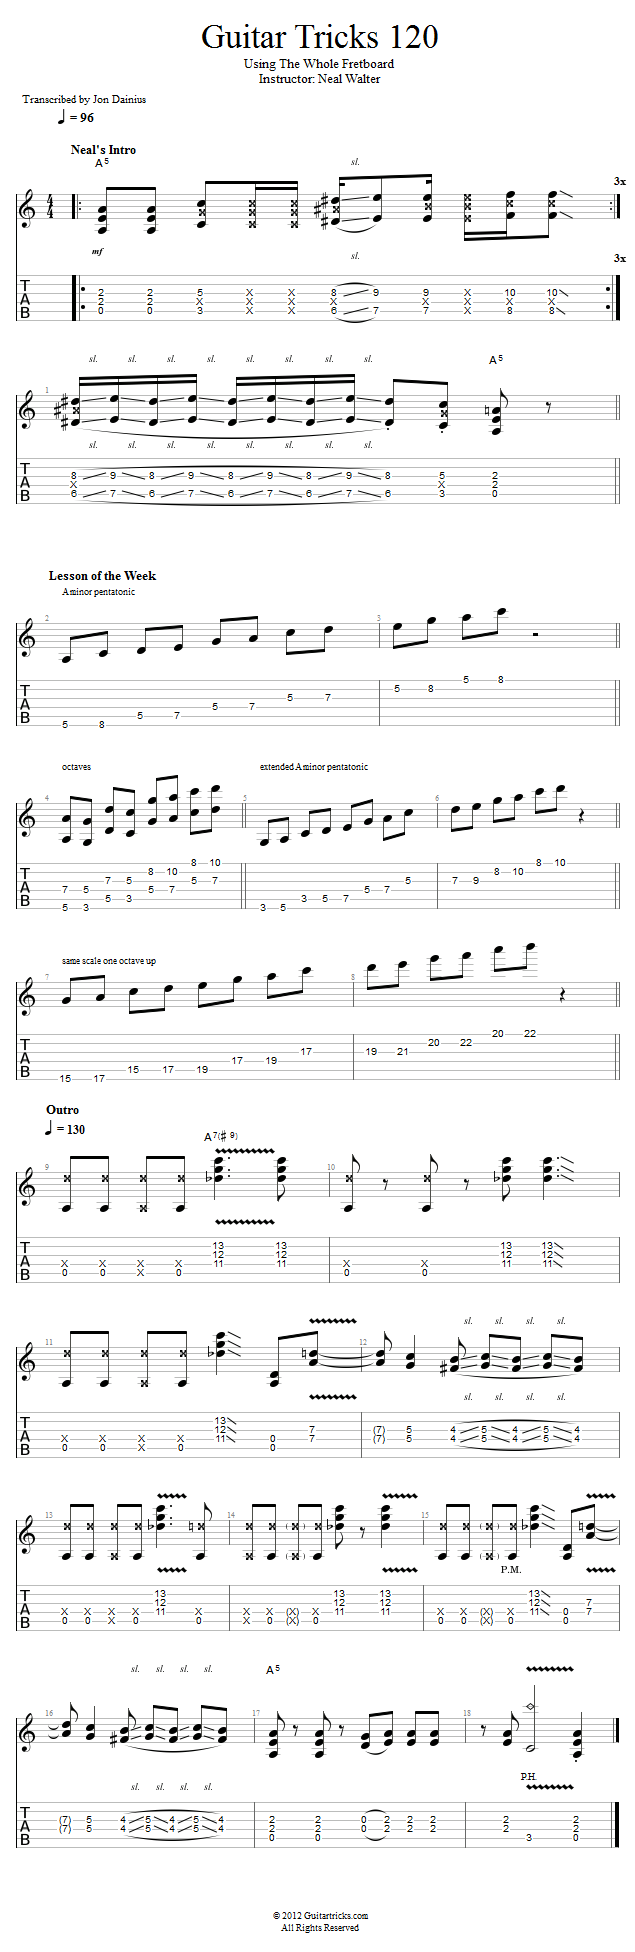 Guitar Tricks 120: Using The Whole Fretboard song notation